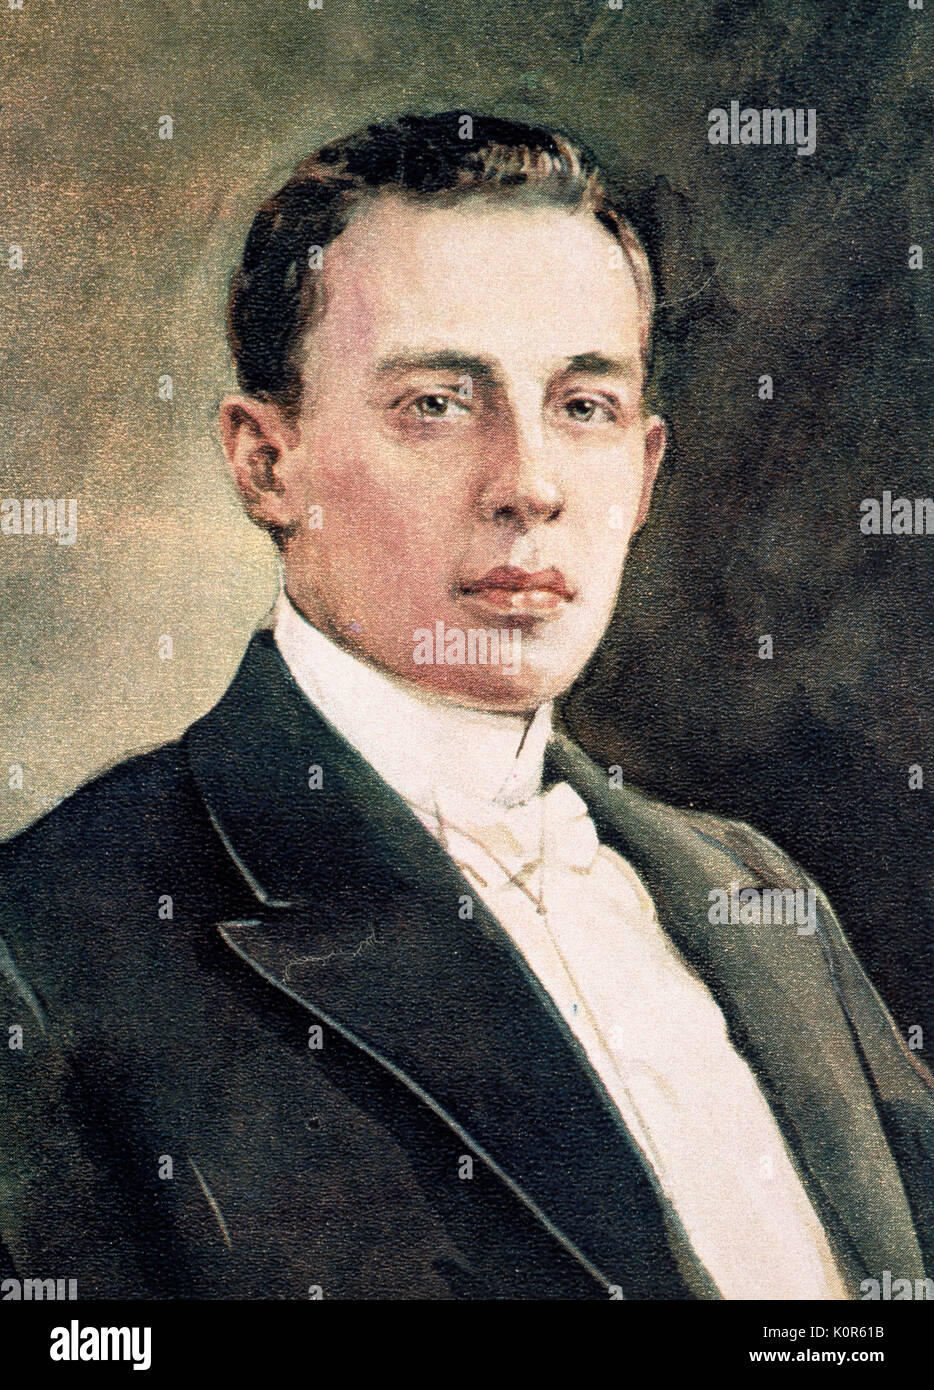 Sergei Rachmaninov as a  young man. Russian pianist and composer. 1 April 1873 - 28 March 1943. Stock Photo